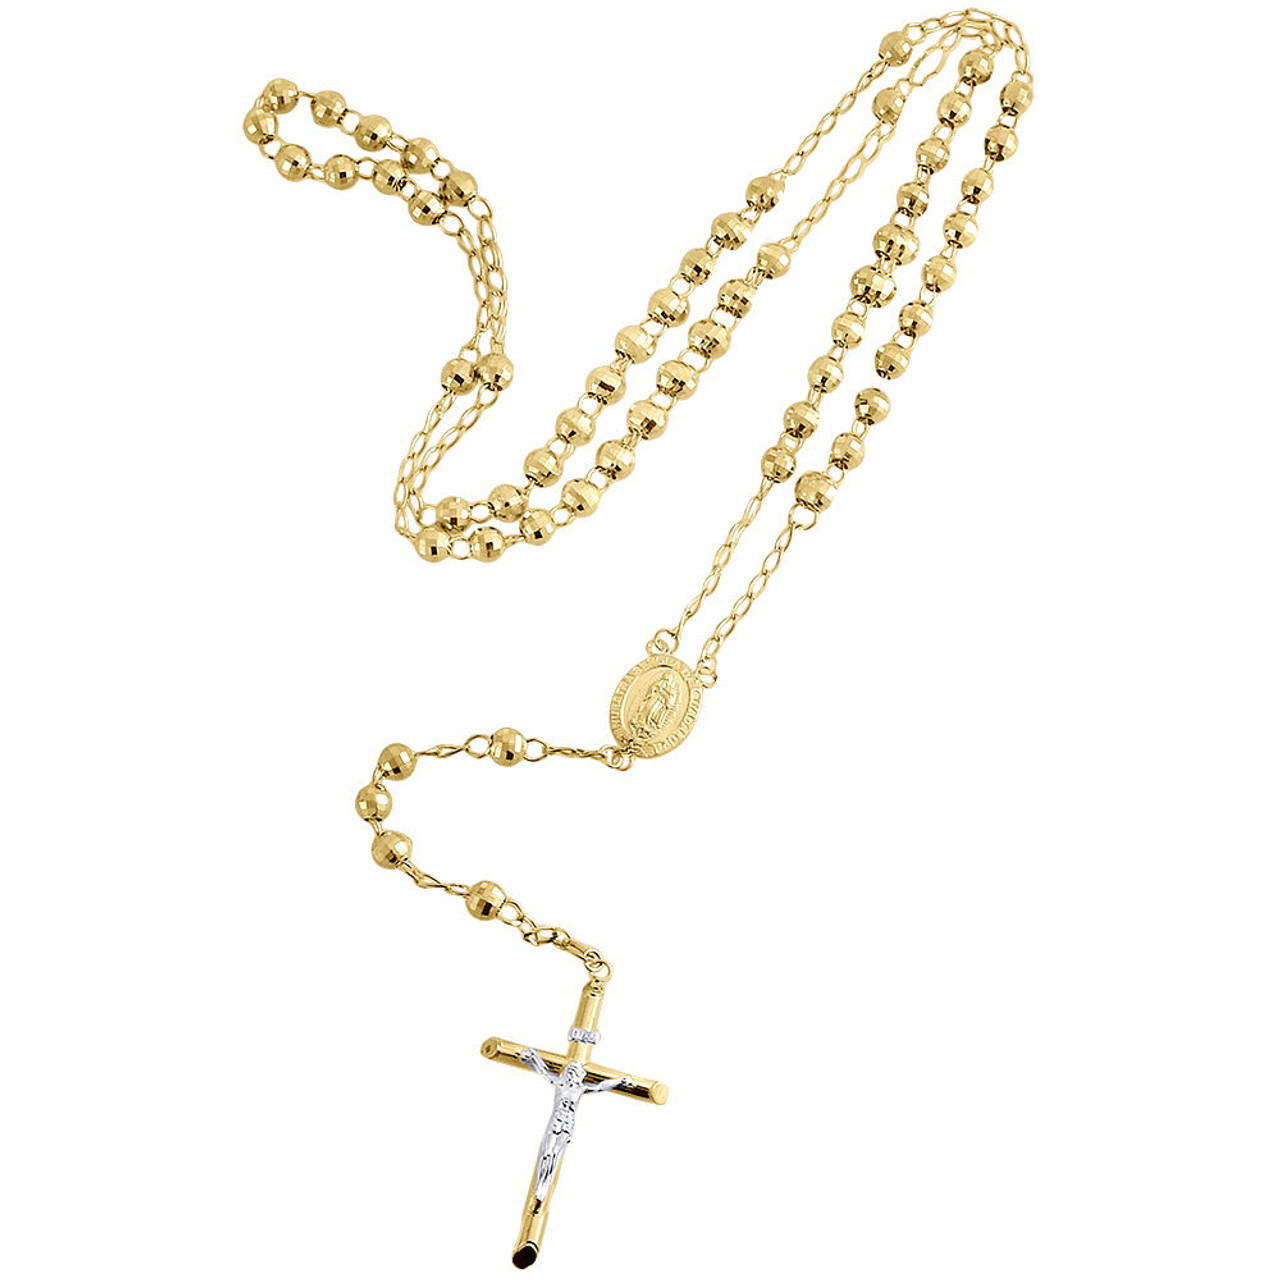 10k Tri-Colored Gold 16.18g Rosary Necklace | Property Room